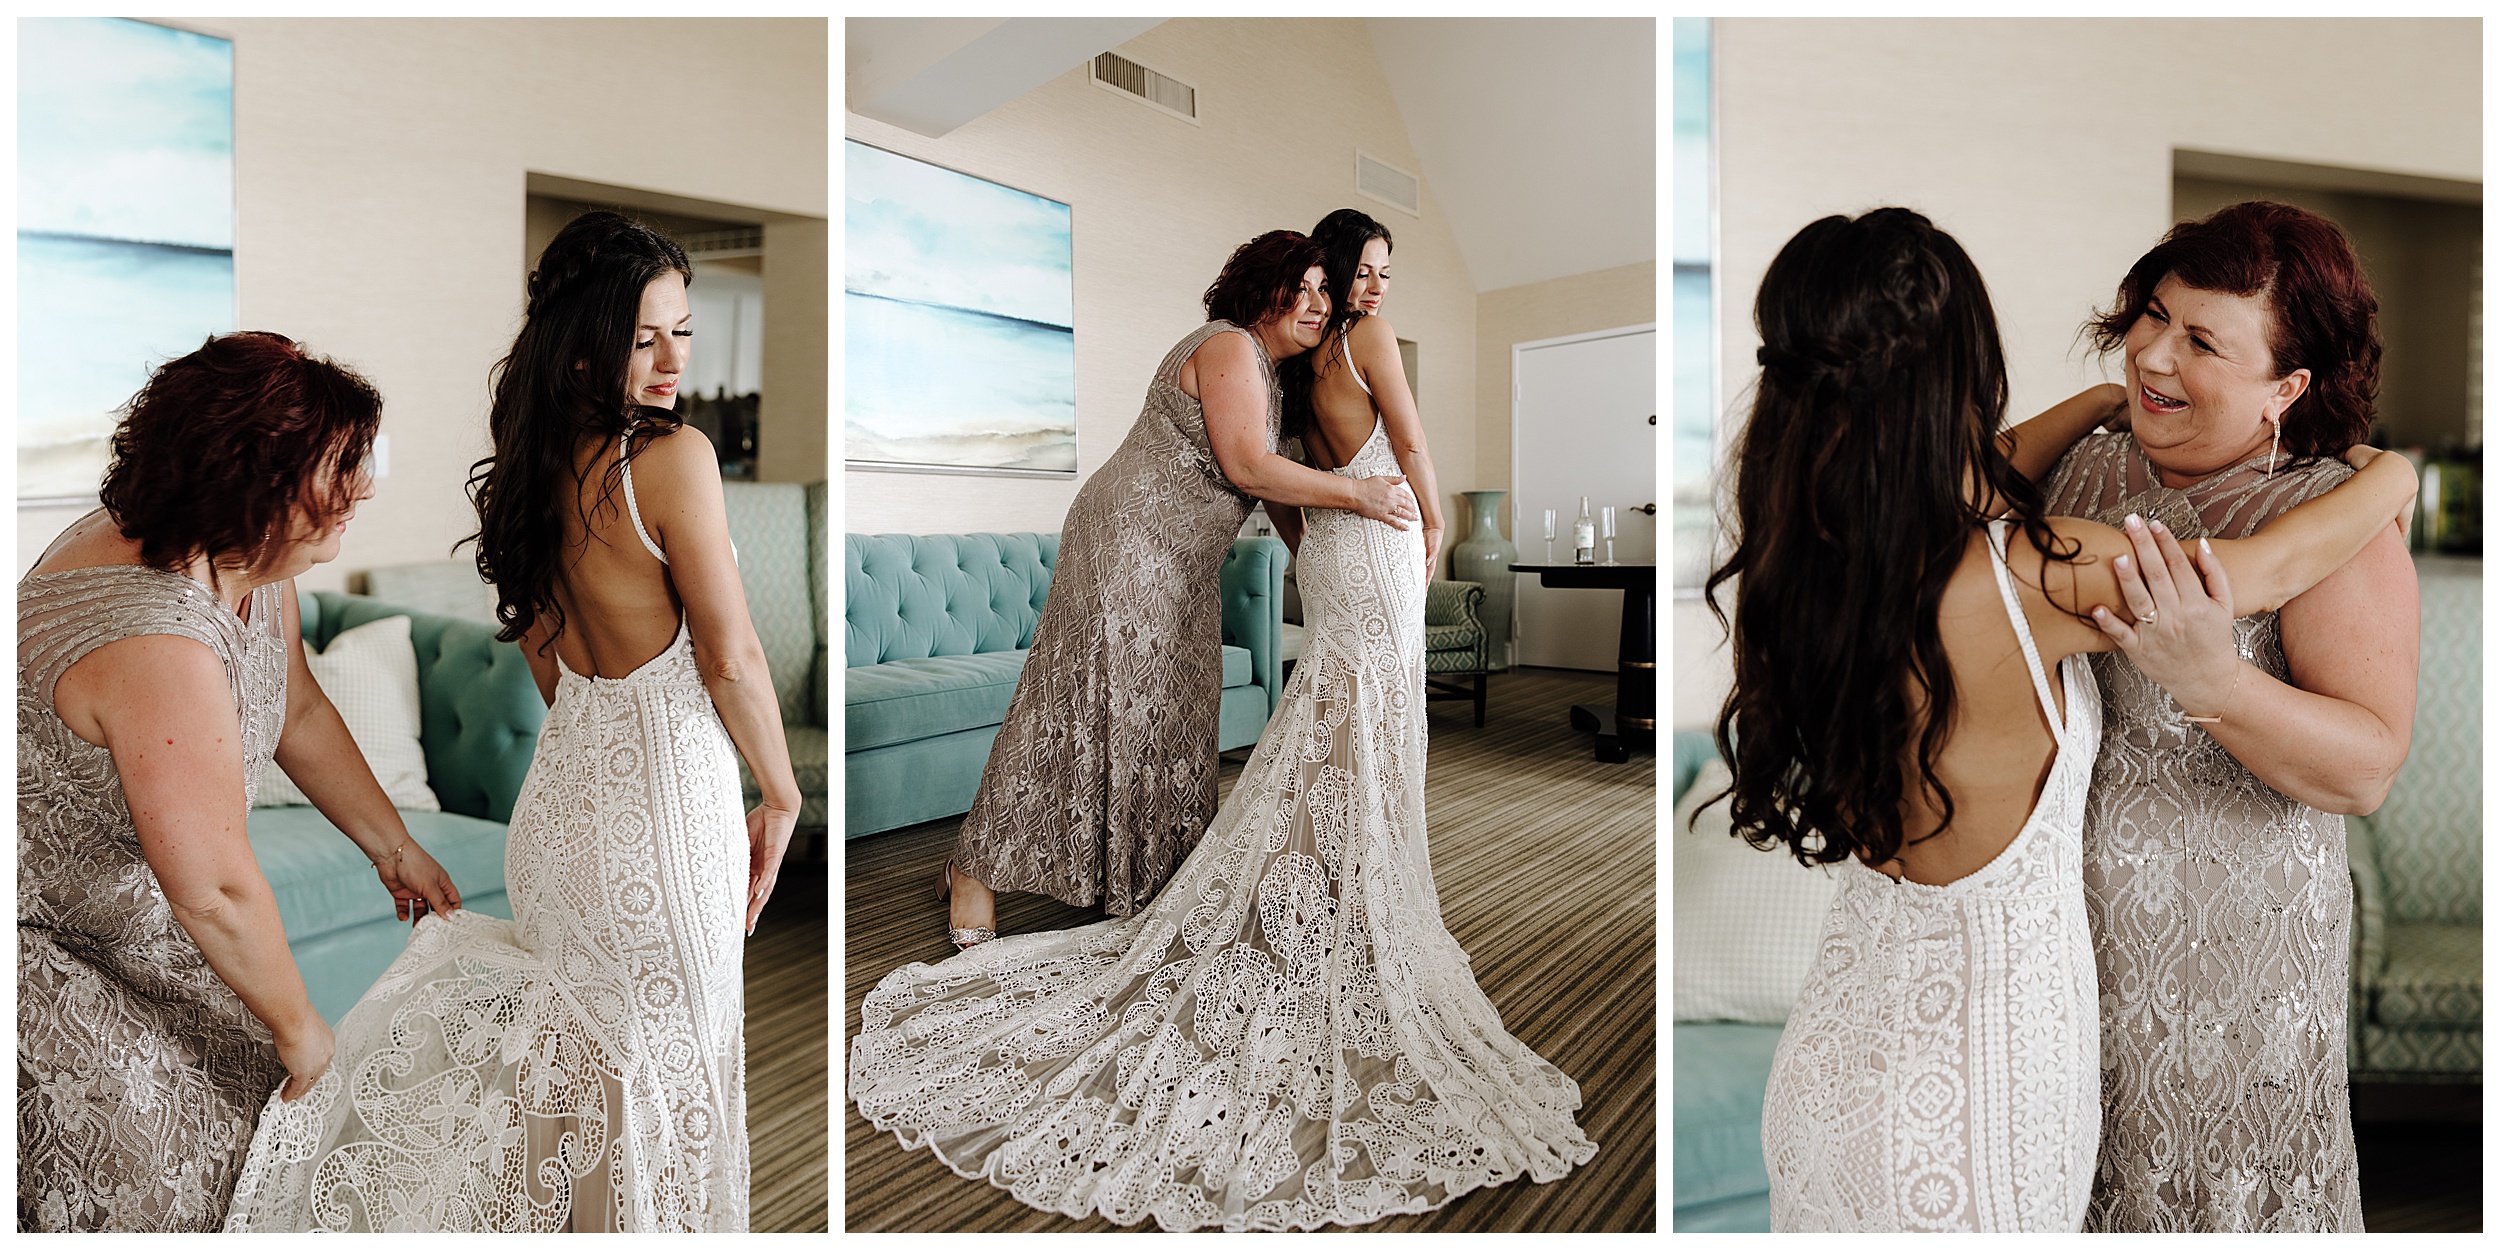 bride putting dress on, mom zipping up bride's dress, bride putting on wedding dress